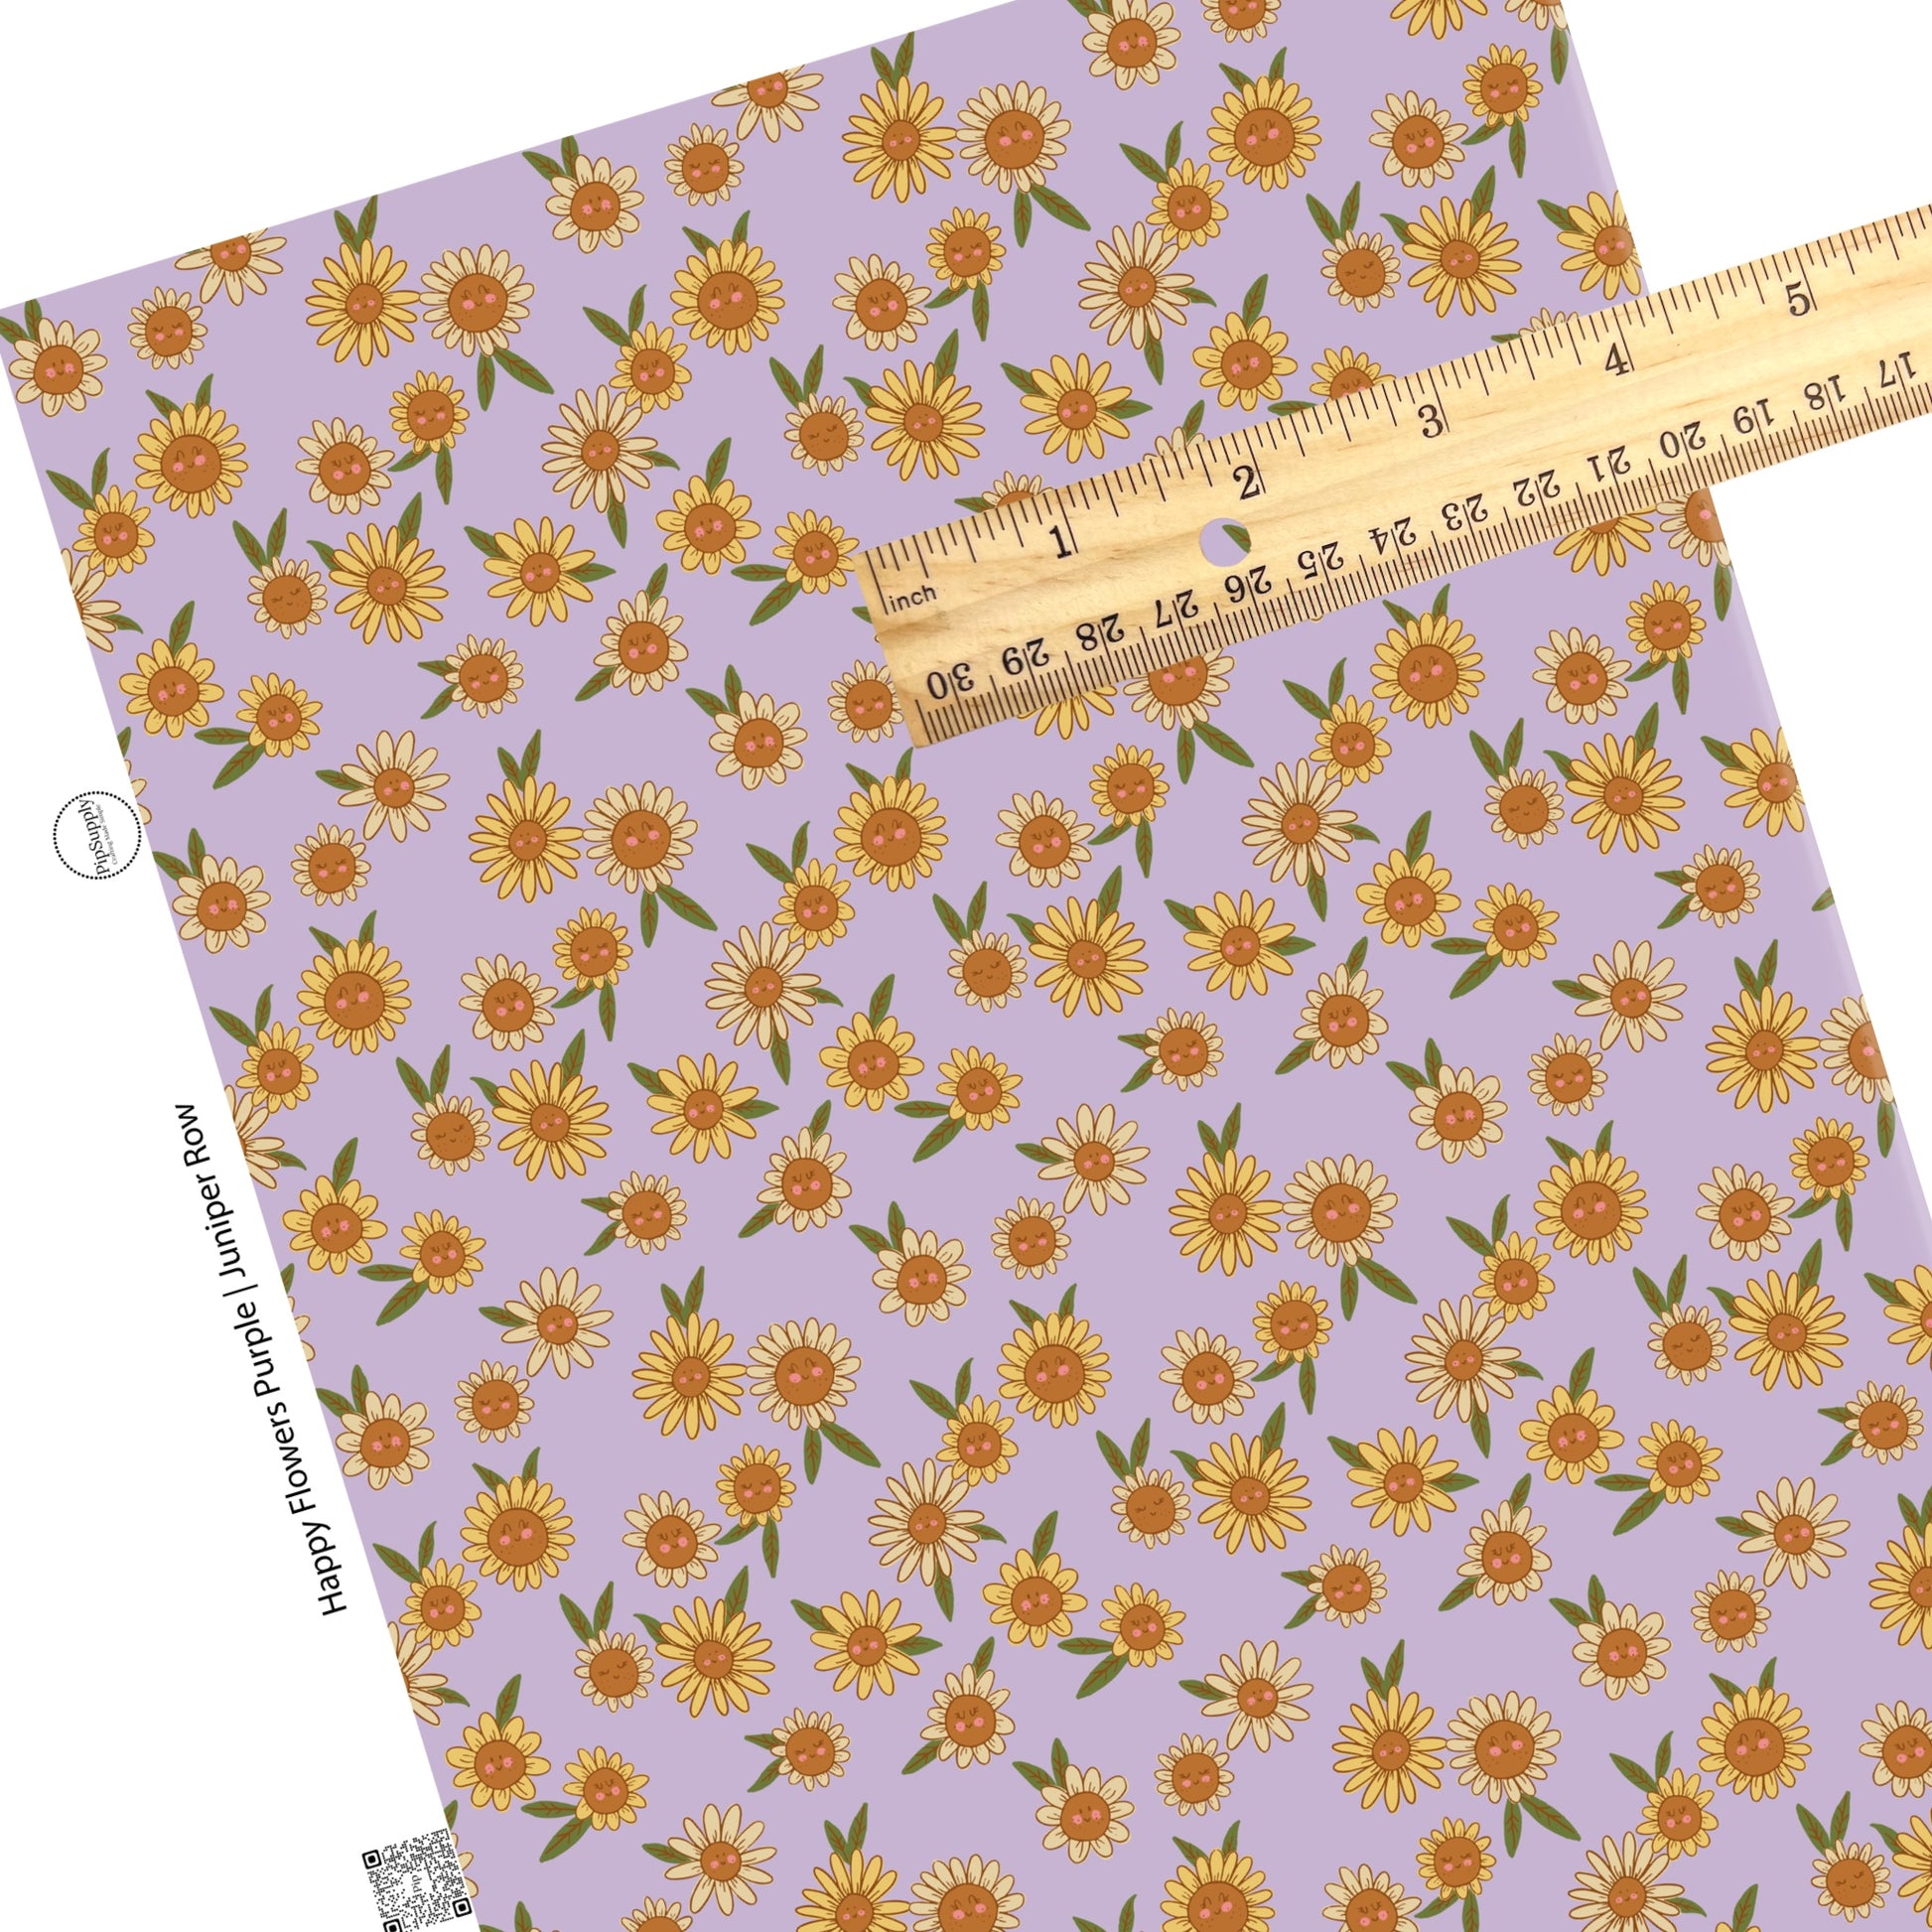 These spring flowers faux leather sheets contain the following design elements: smiley flowers on purple. Our CPSIA compliant faux leather sheets or rolls can be used for all types of crafting projects. 